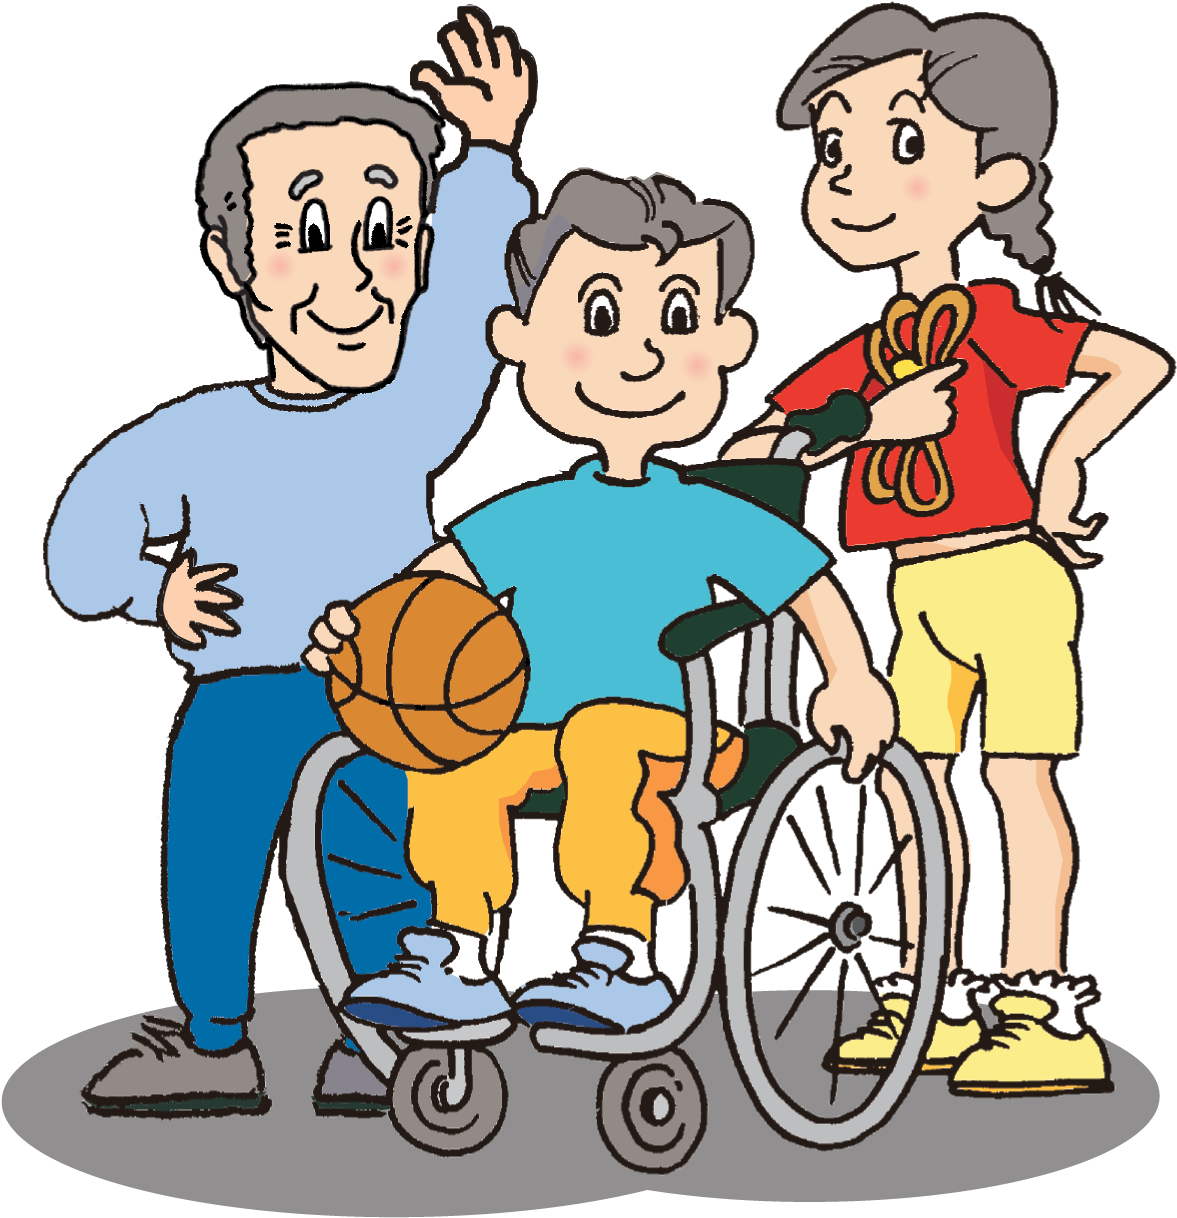 Fitness Exercise For Persons With Disabilities - Virtual Class (1260x1316)